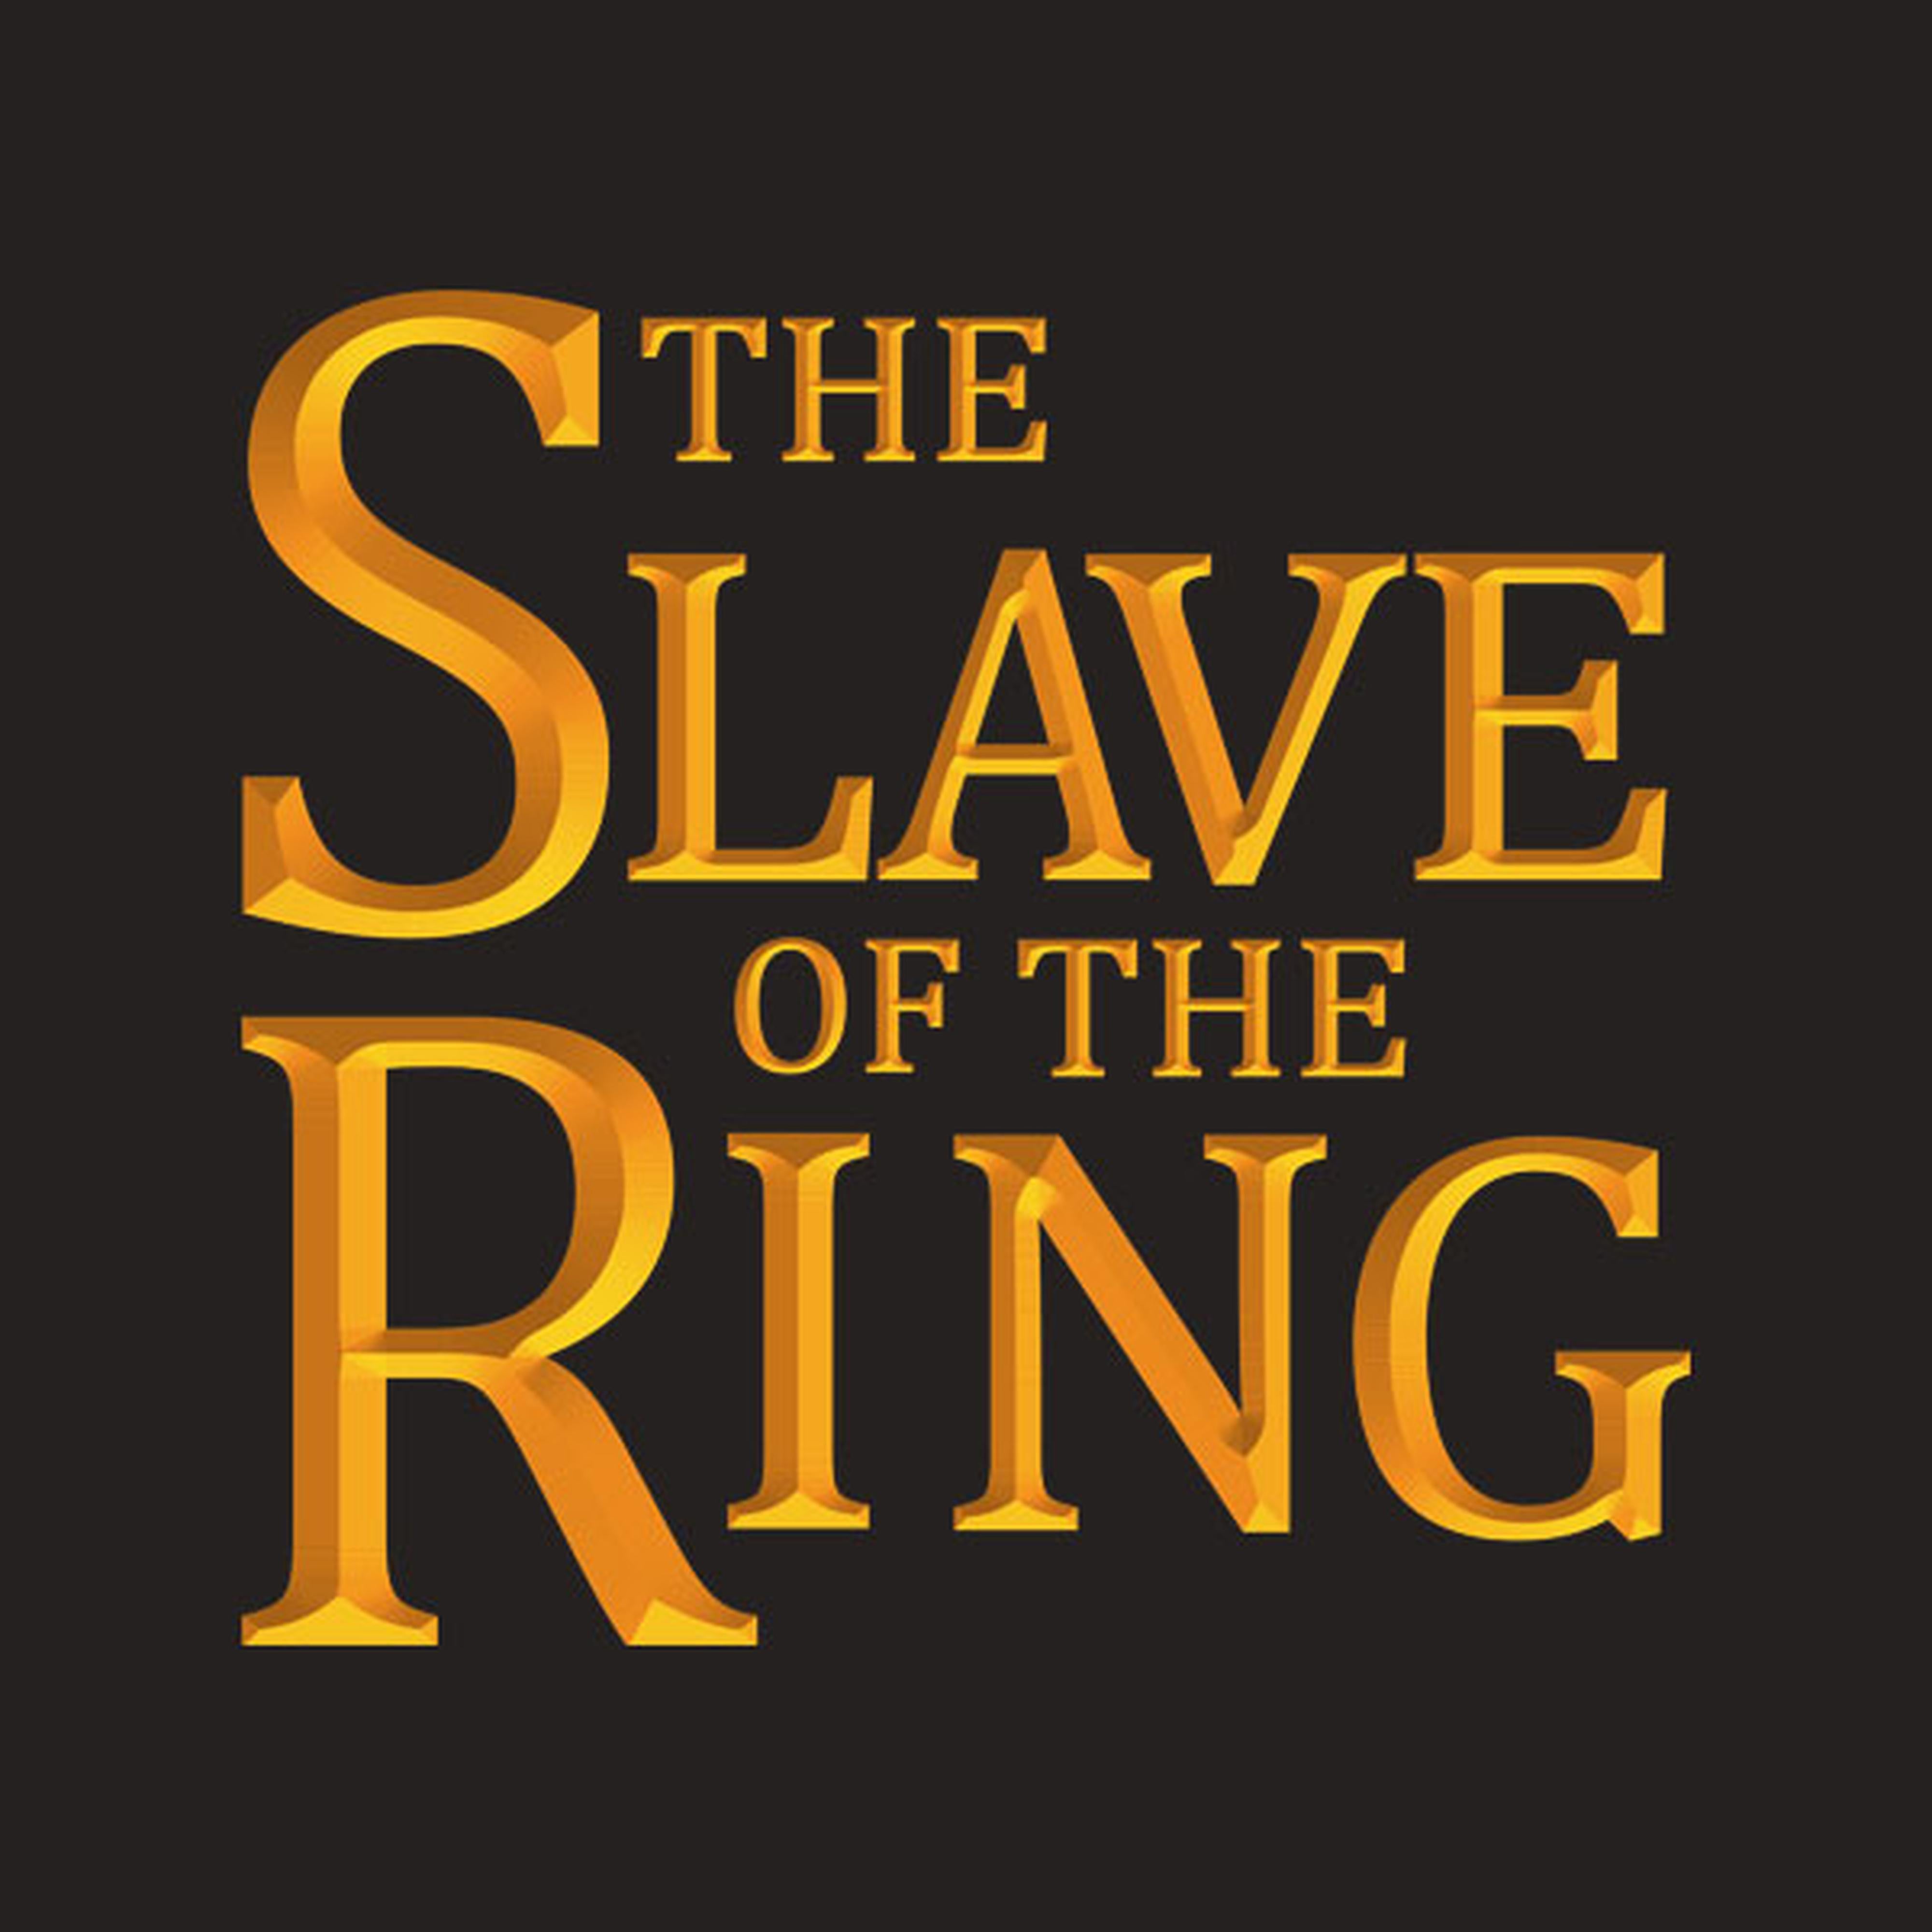 The slave of the ring